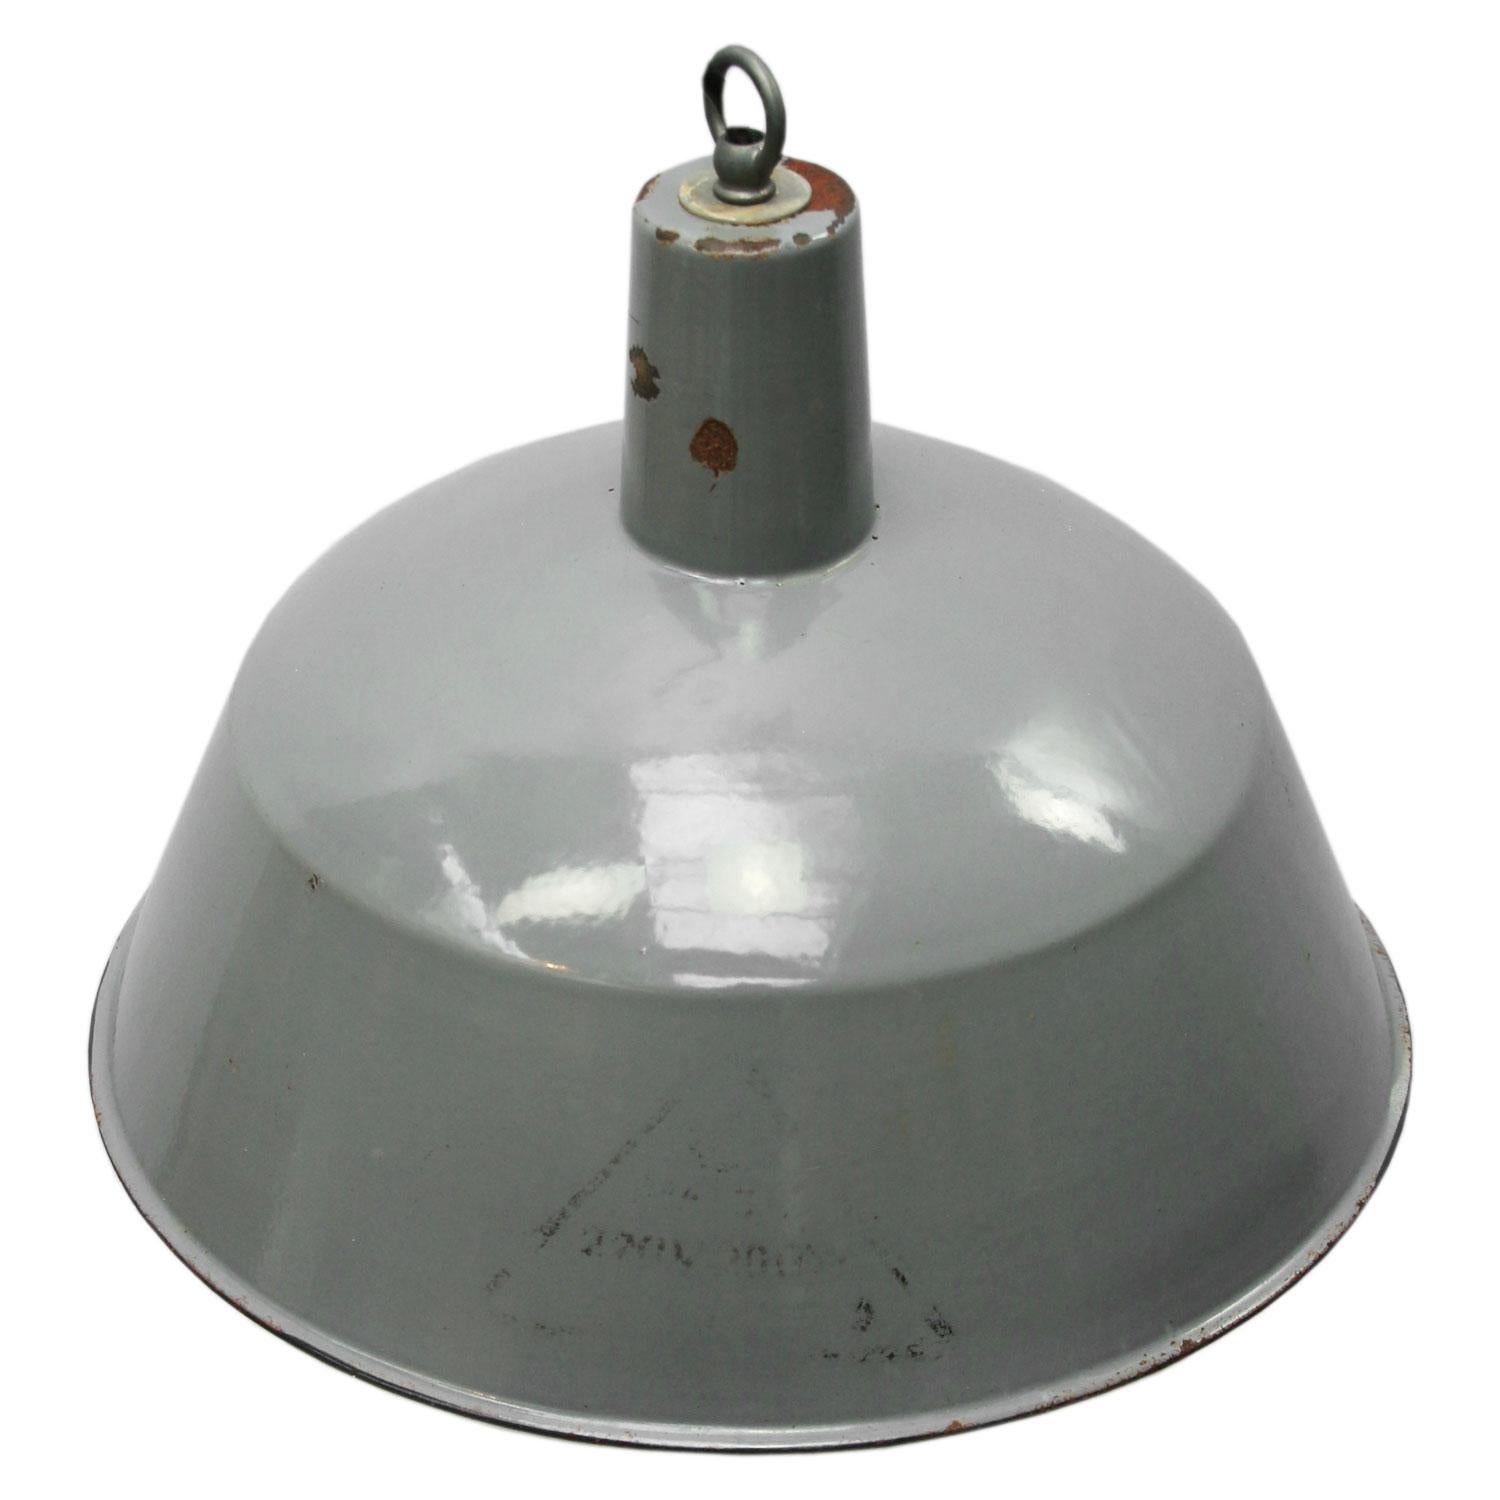 Factory hanging lamp
gray enamel with white type, white interior

Weight: 2.00 kg / 4.4 lb

Priced per individual item. All lamps have been made suitable by international standards for incandescent light bulbs, energy-efficient and LED bulbs.